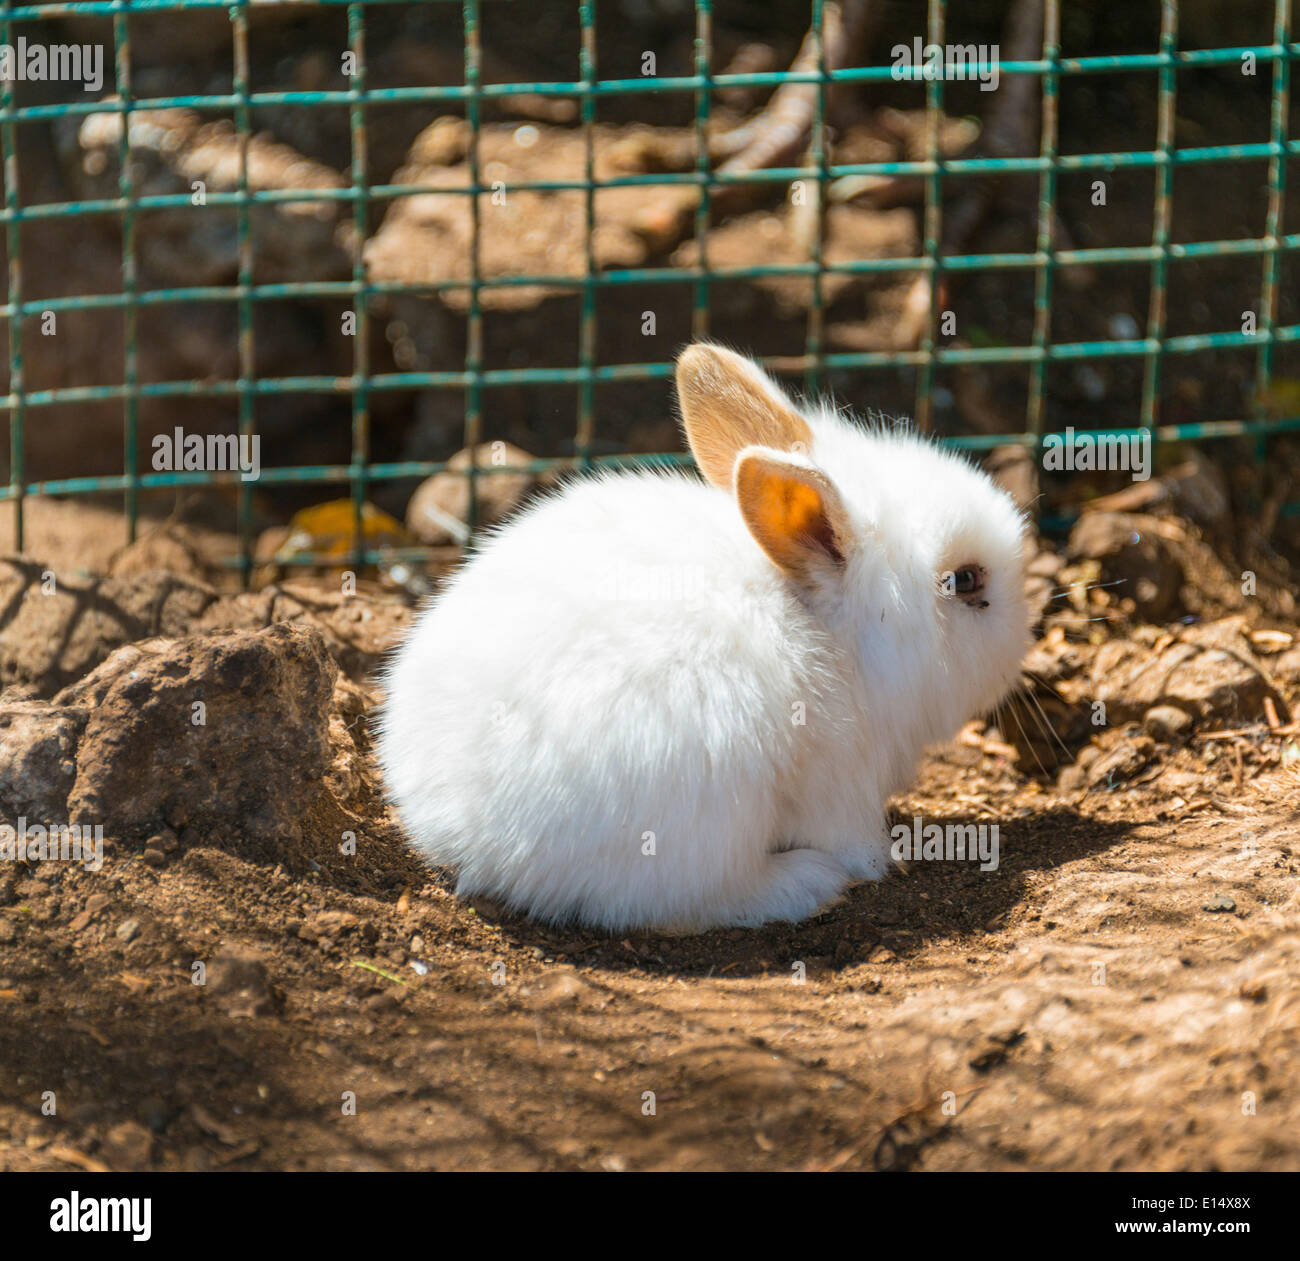 Young white rabbit in a cage, captive Stock Photo